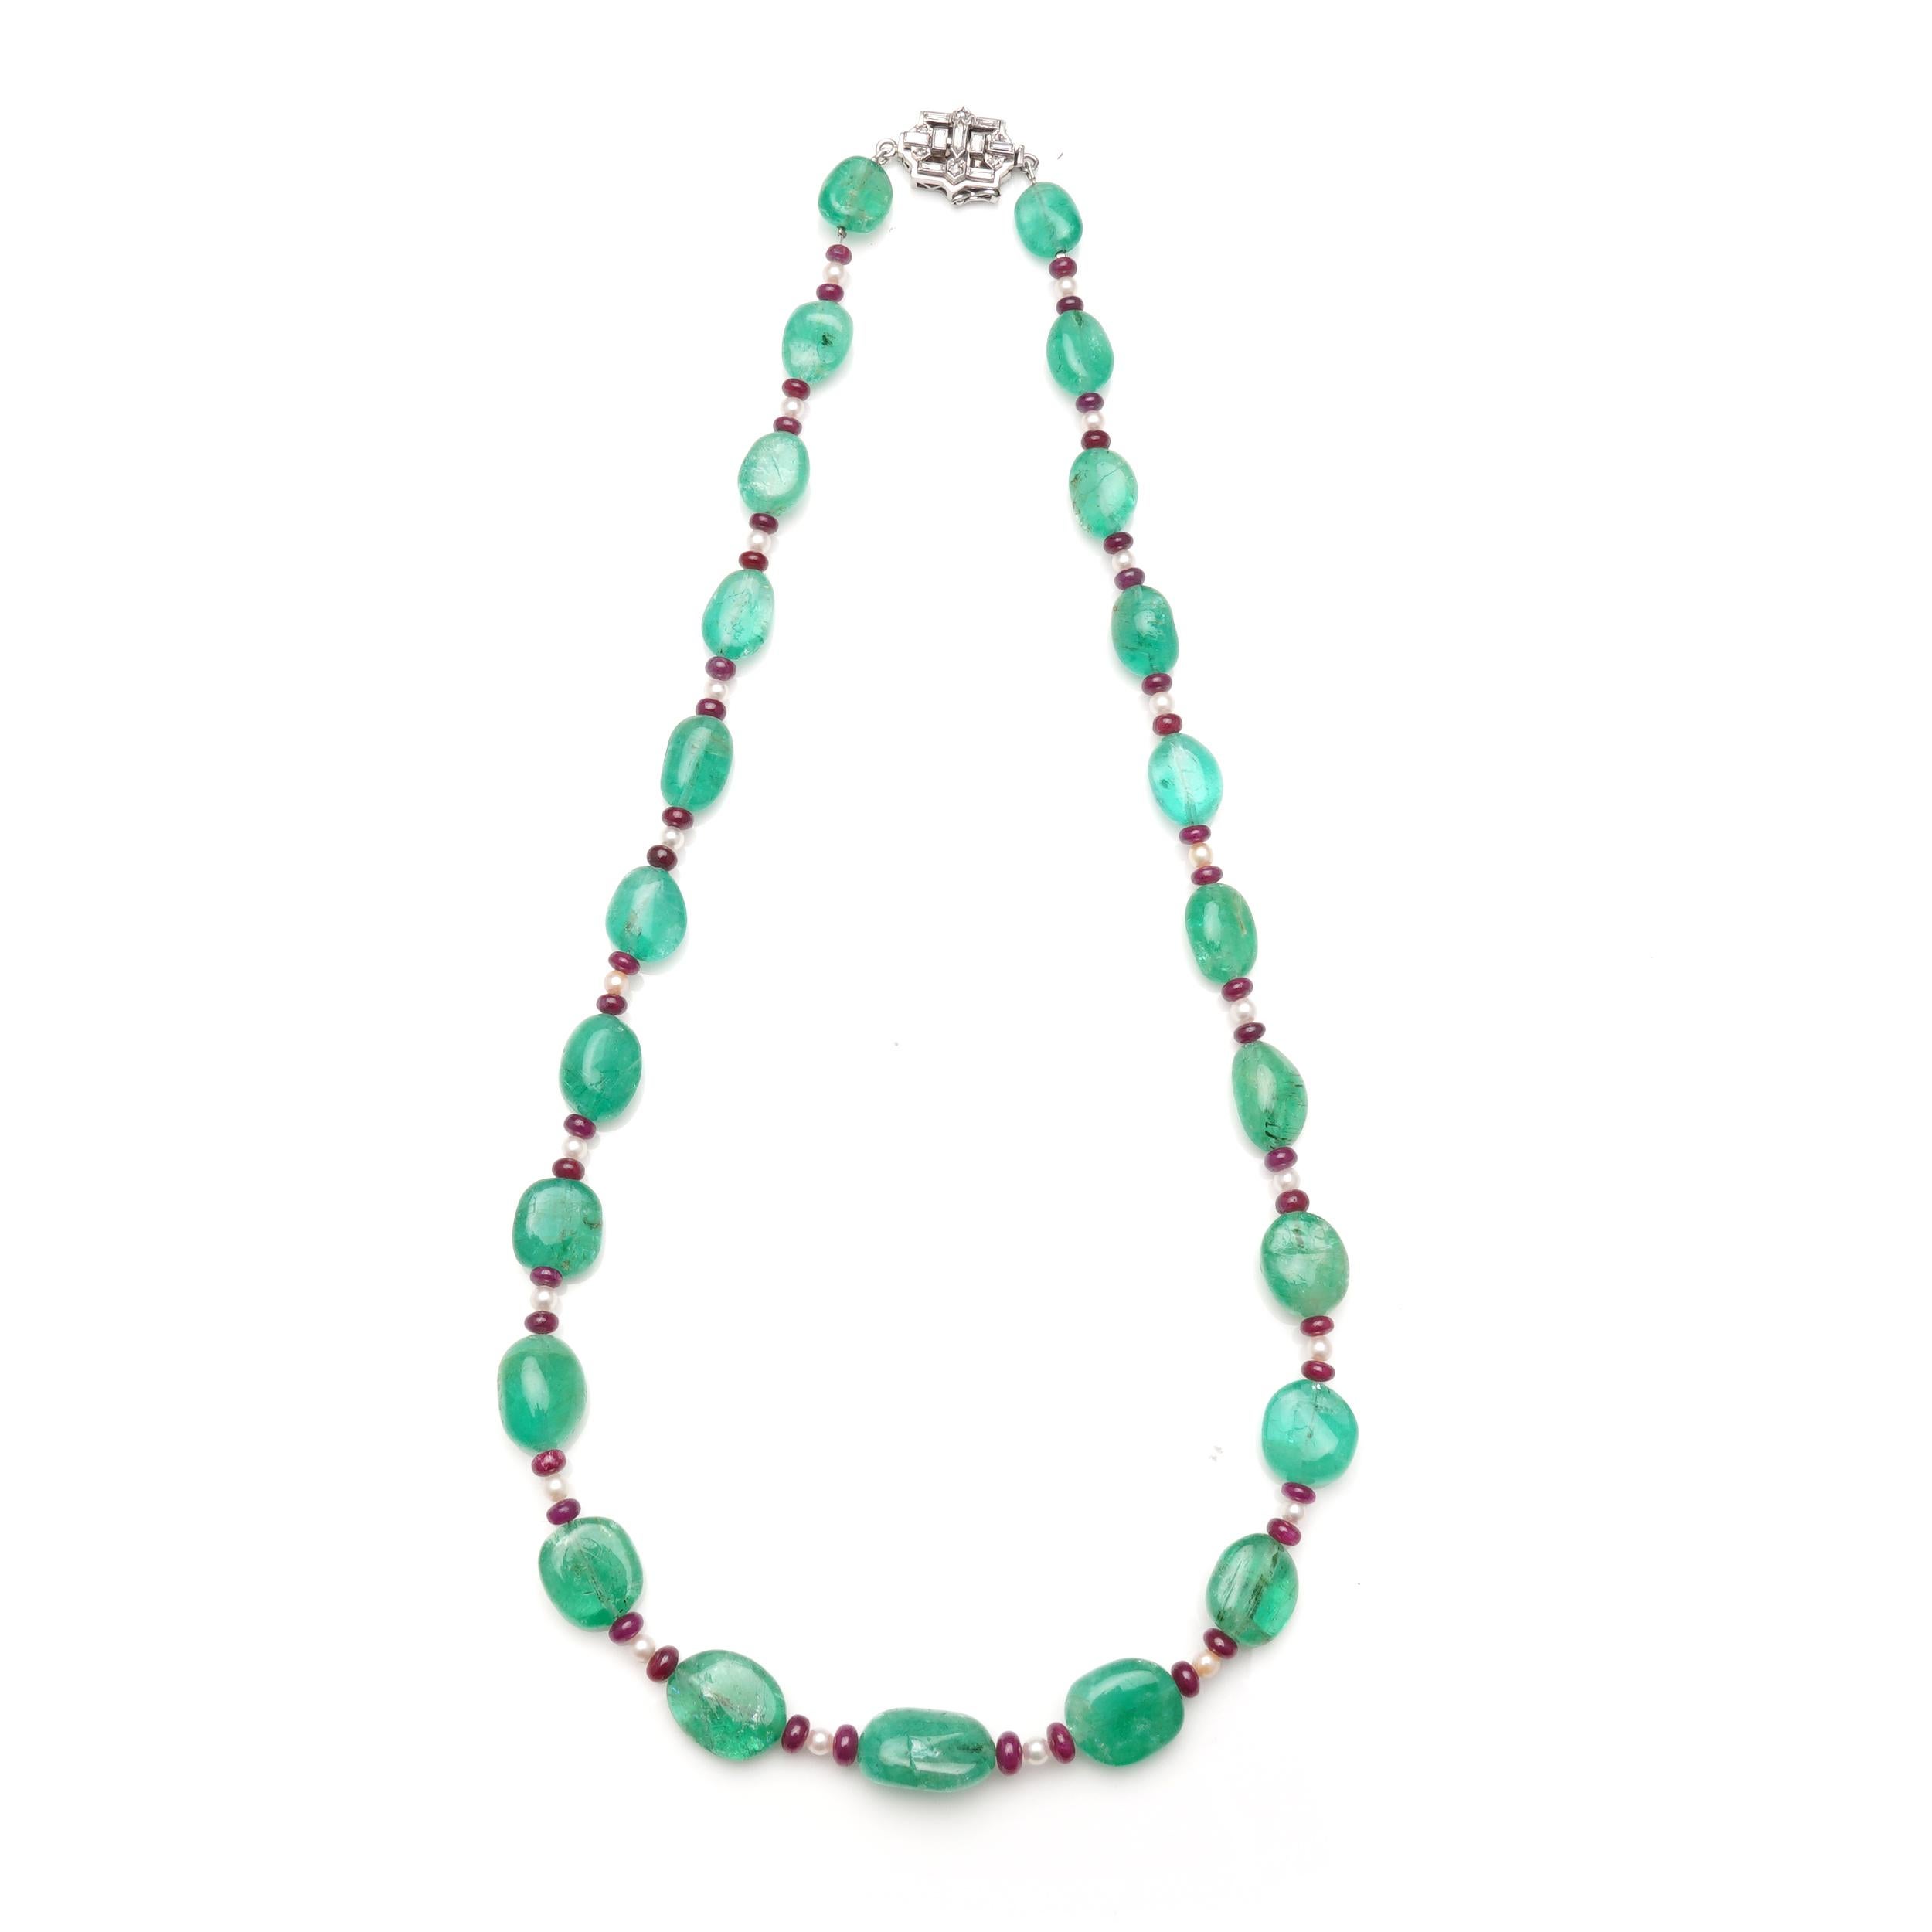 Bead necklace with emeralds, rubellites, and seed pearls with a platinum hidden box clasp. 
The clasp has been tested positive for 950/1000 platinum.

Dimensions:
Necklace full length: 56.7 cm
Widest part width: 1.4 cm
Weight: 53 grams


Cabochon